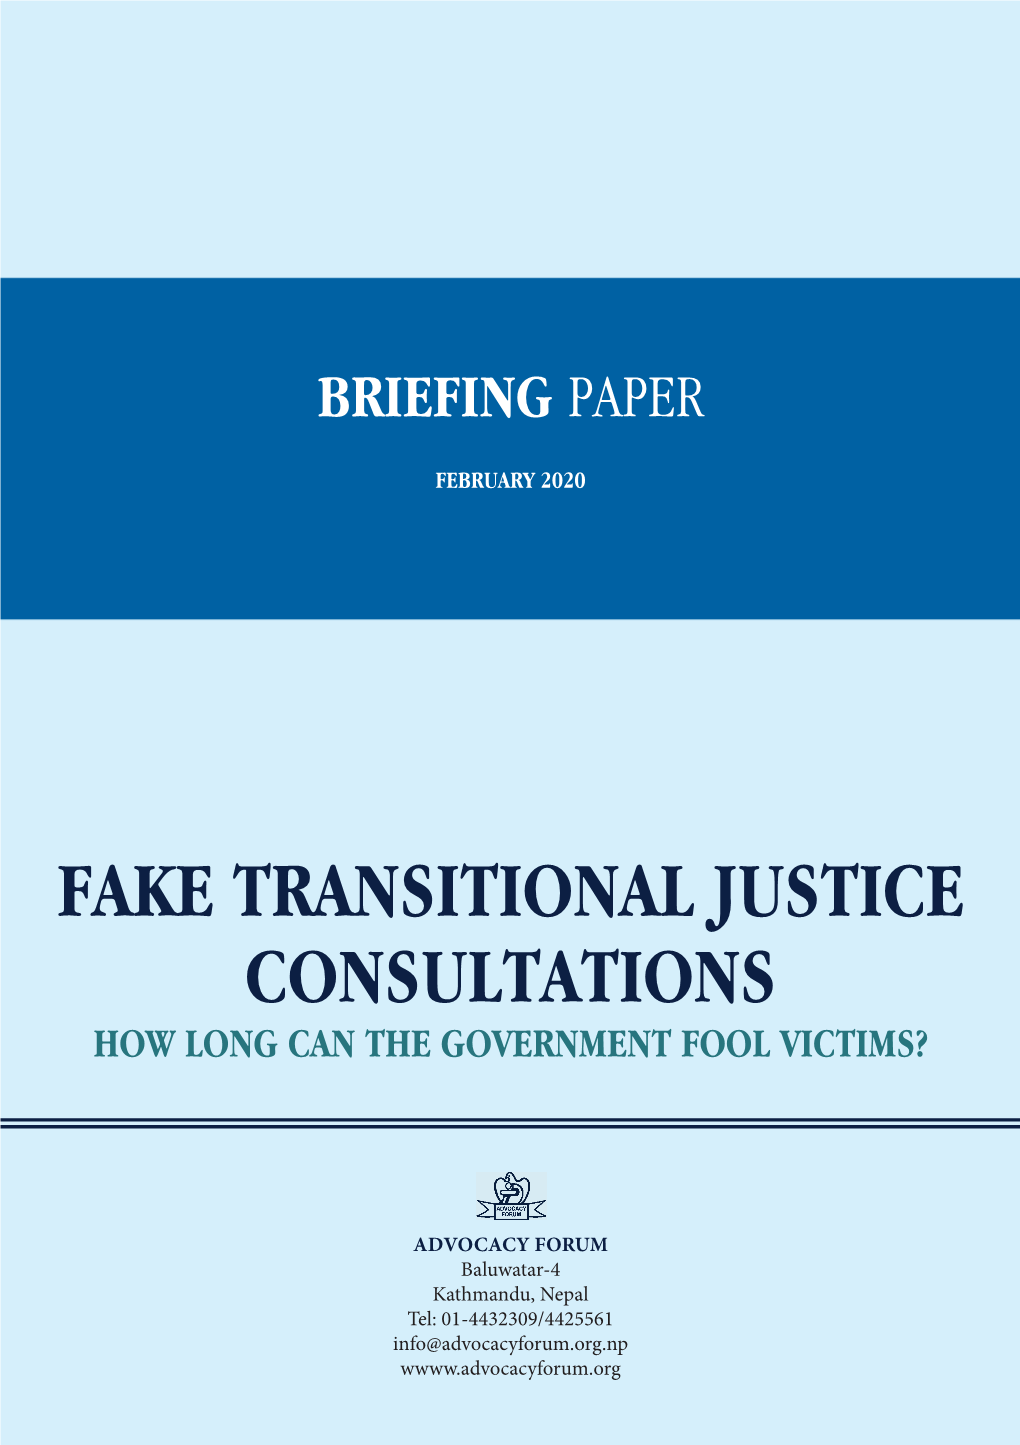 Briefing Paper on TJ Consultations